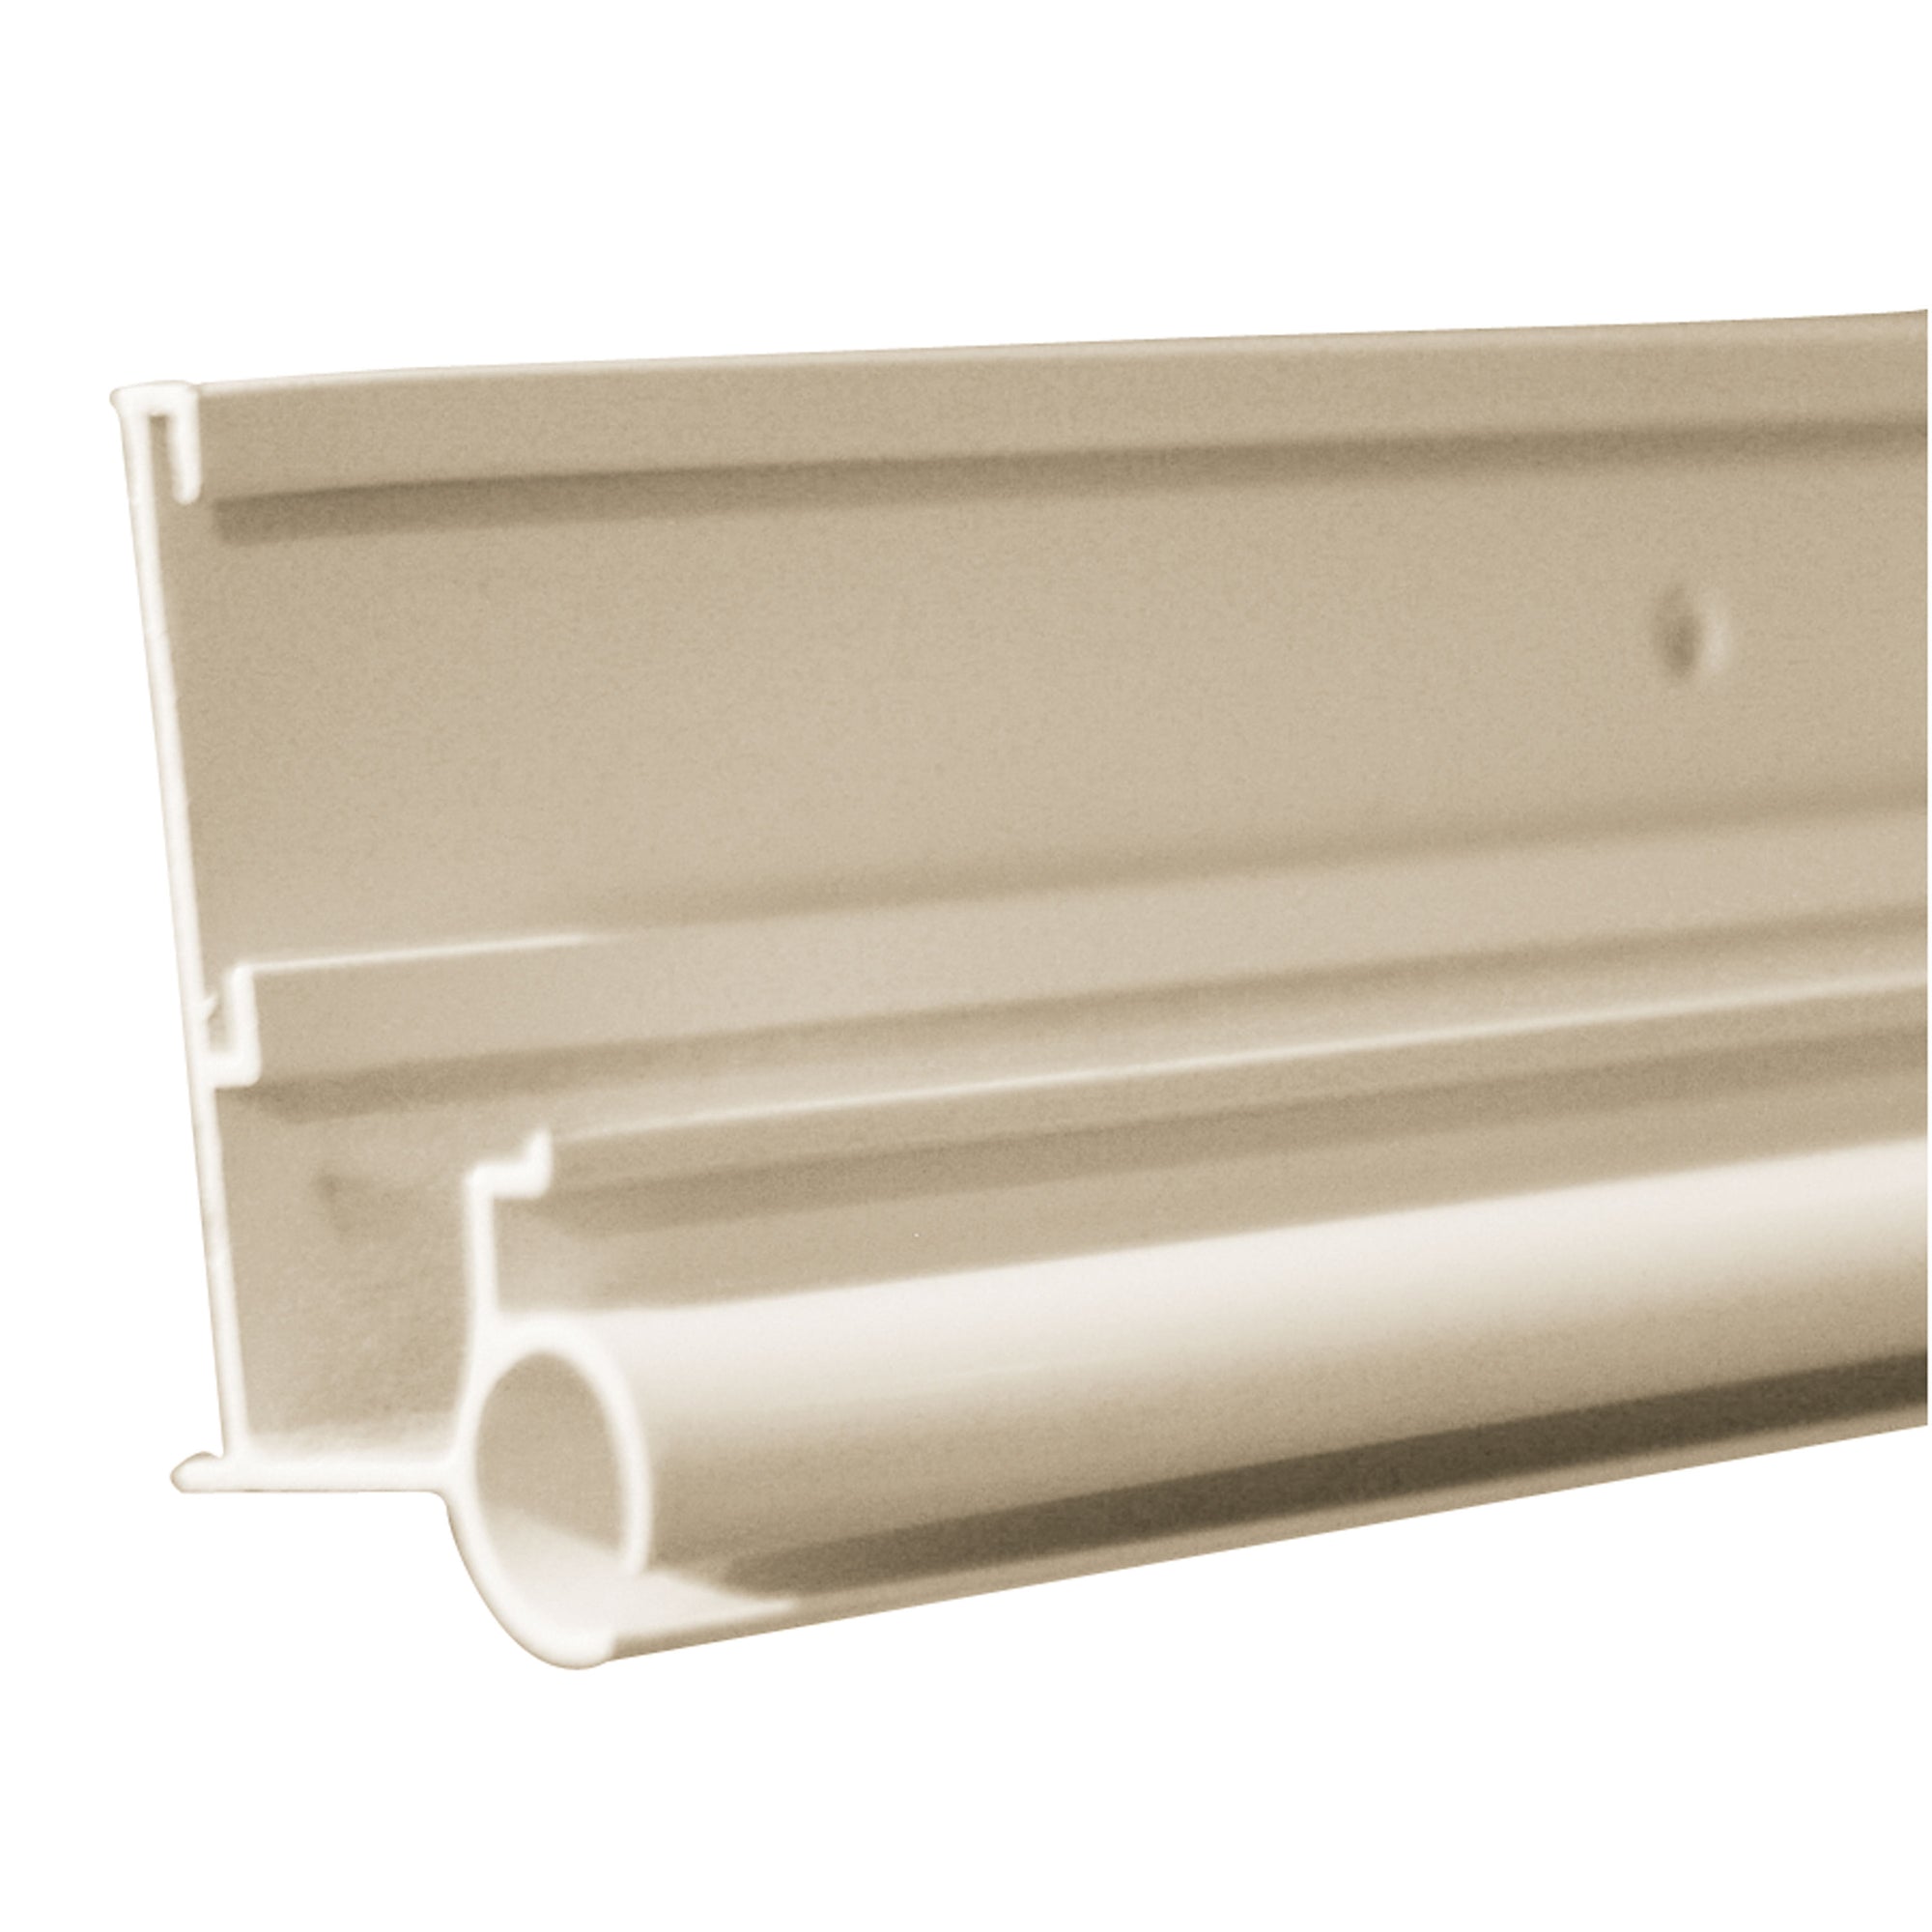 AP Products 021-56304-8 Insert Drip/Awn Rail - 8 ft. (5 Pack)